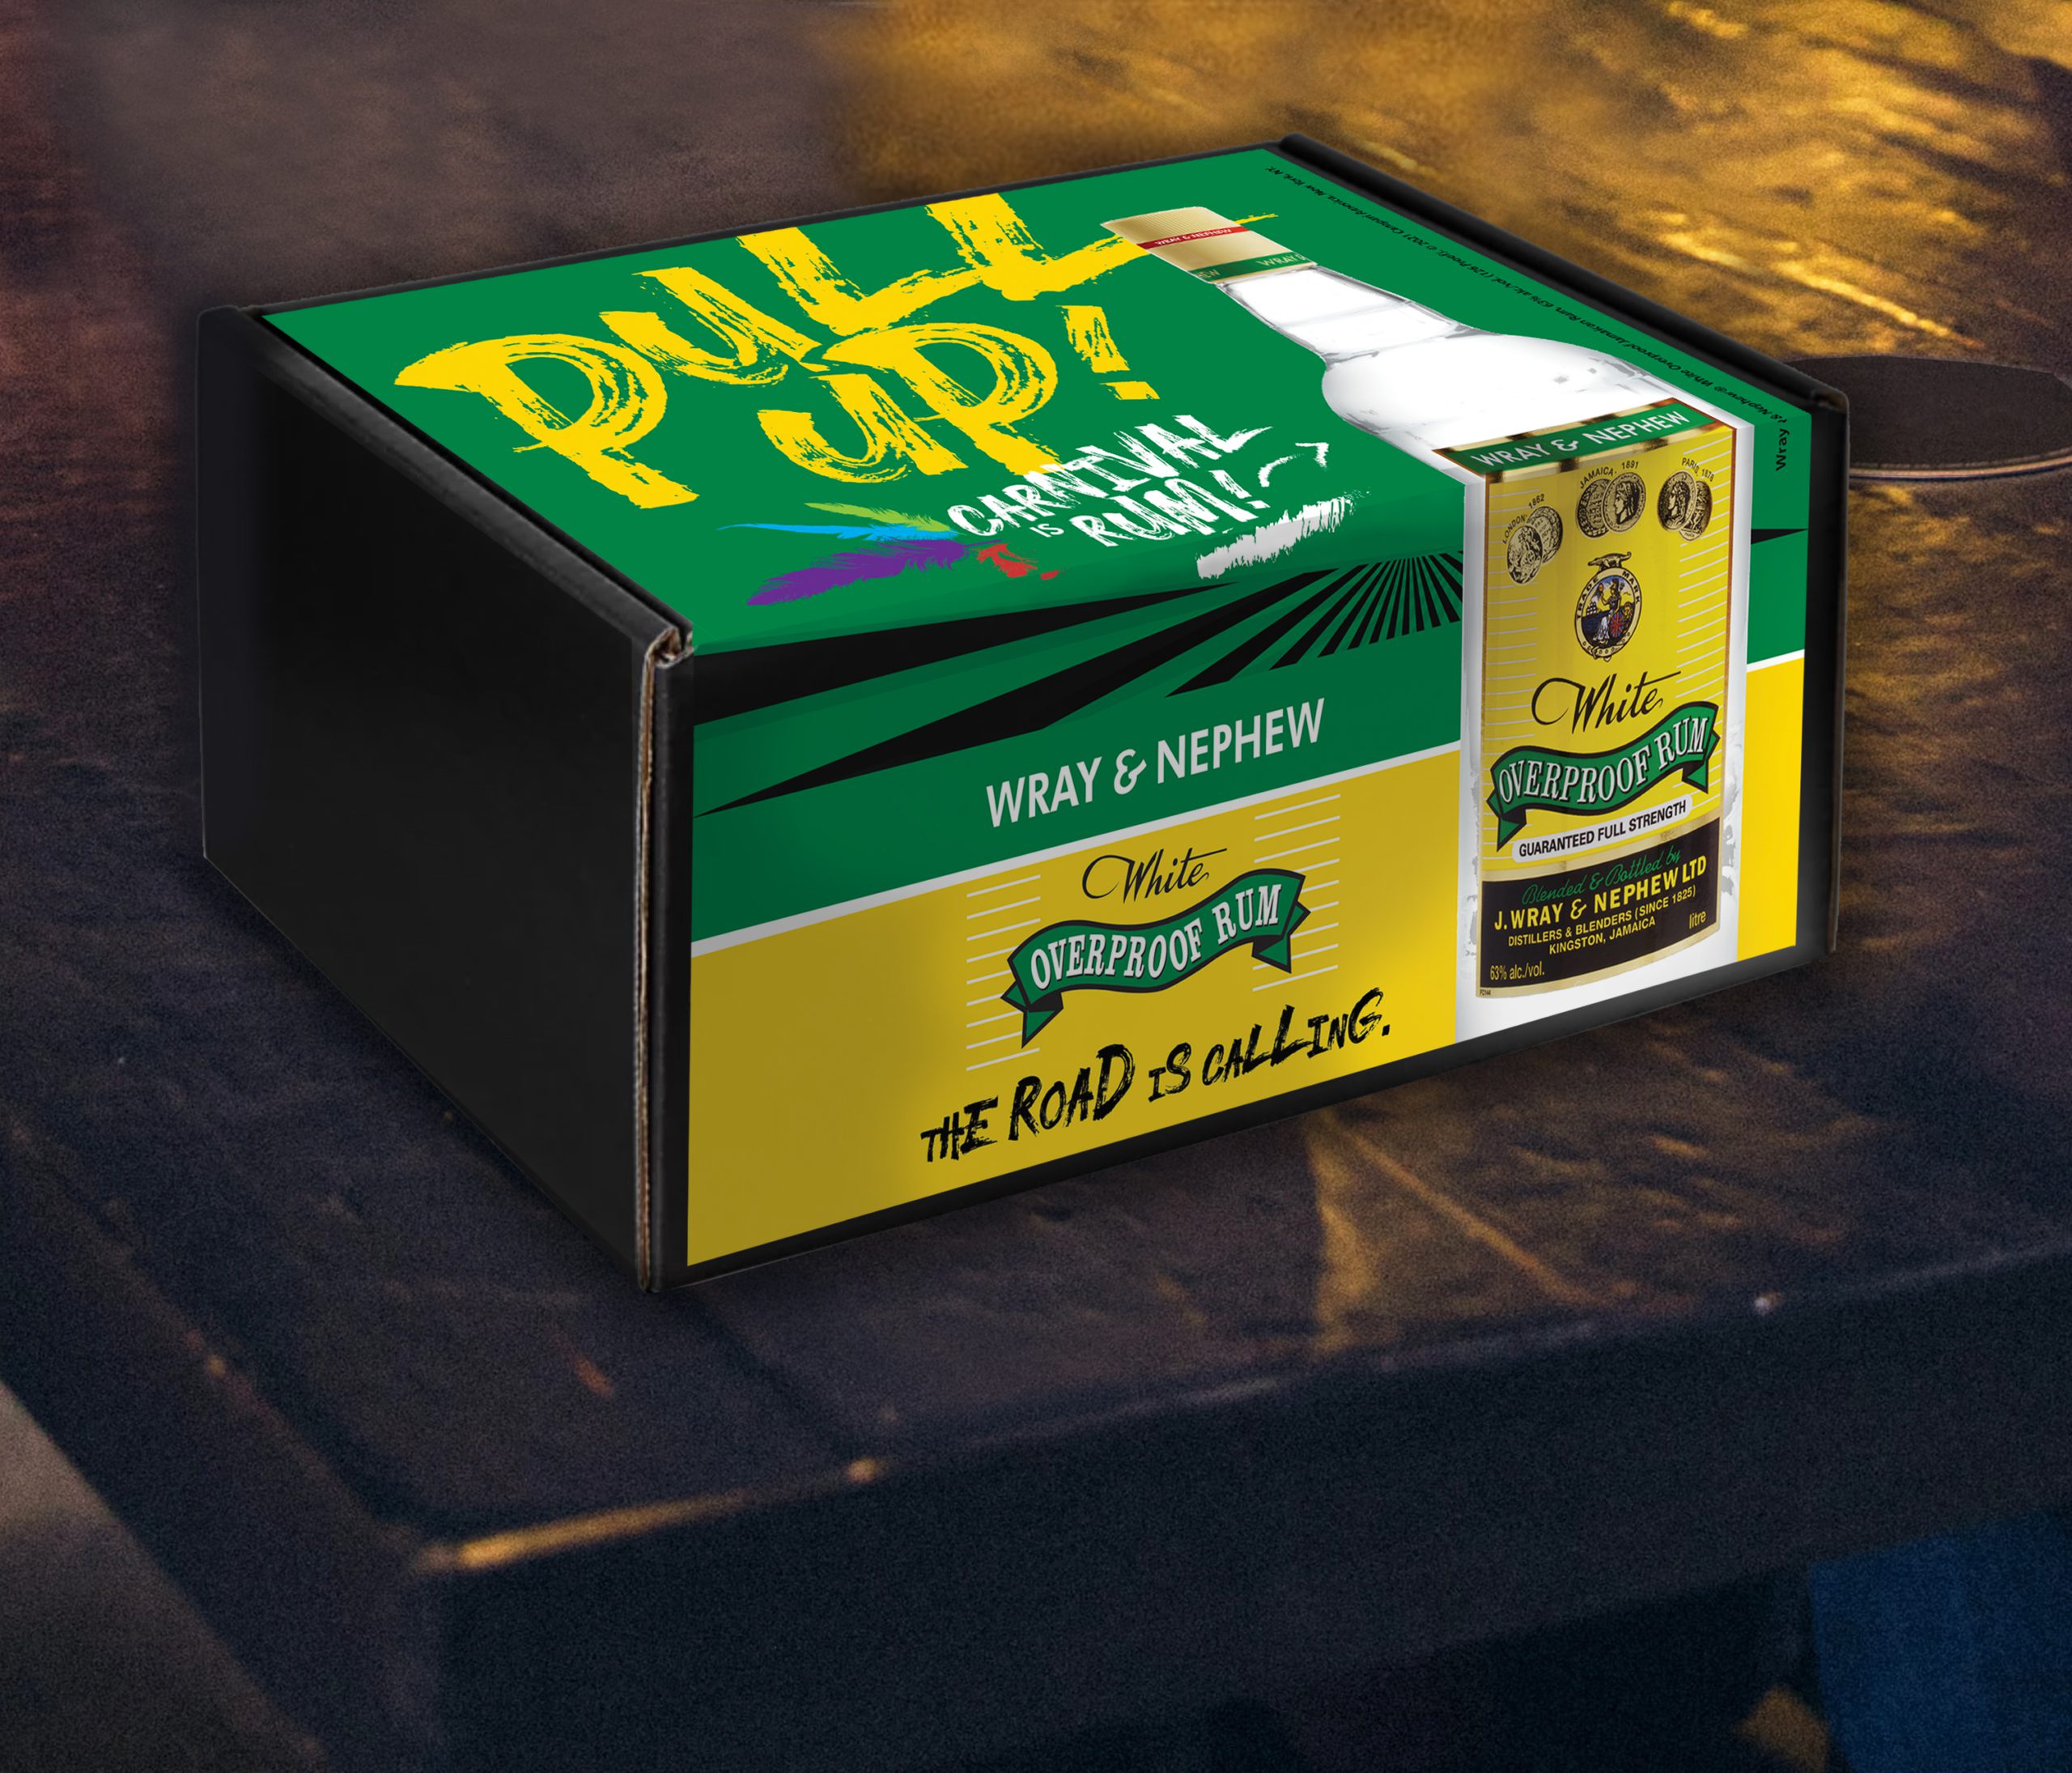 Wray & Nephew - Pull Up - Meal Kit